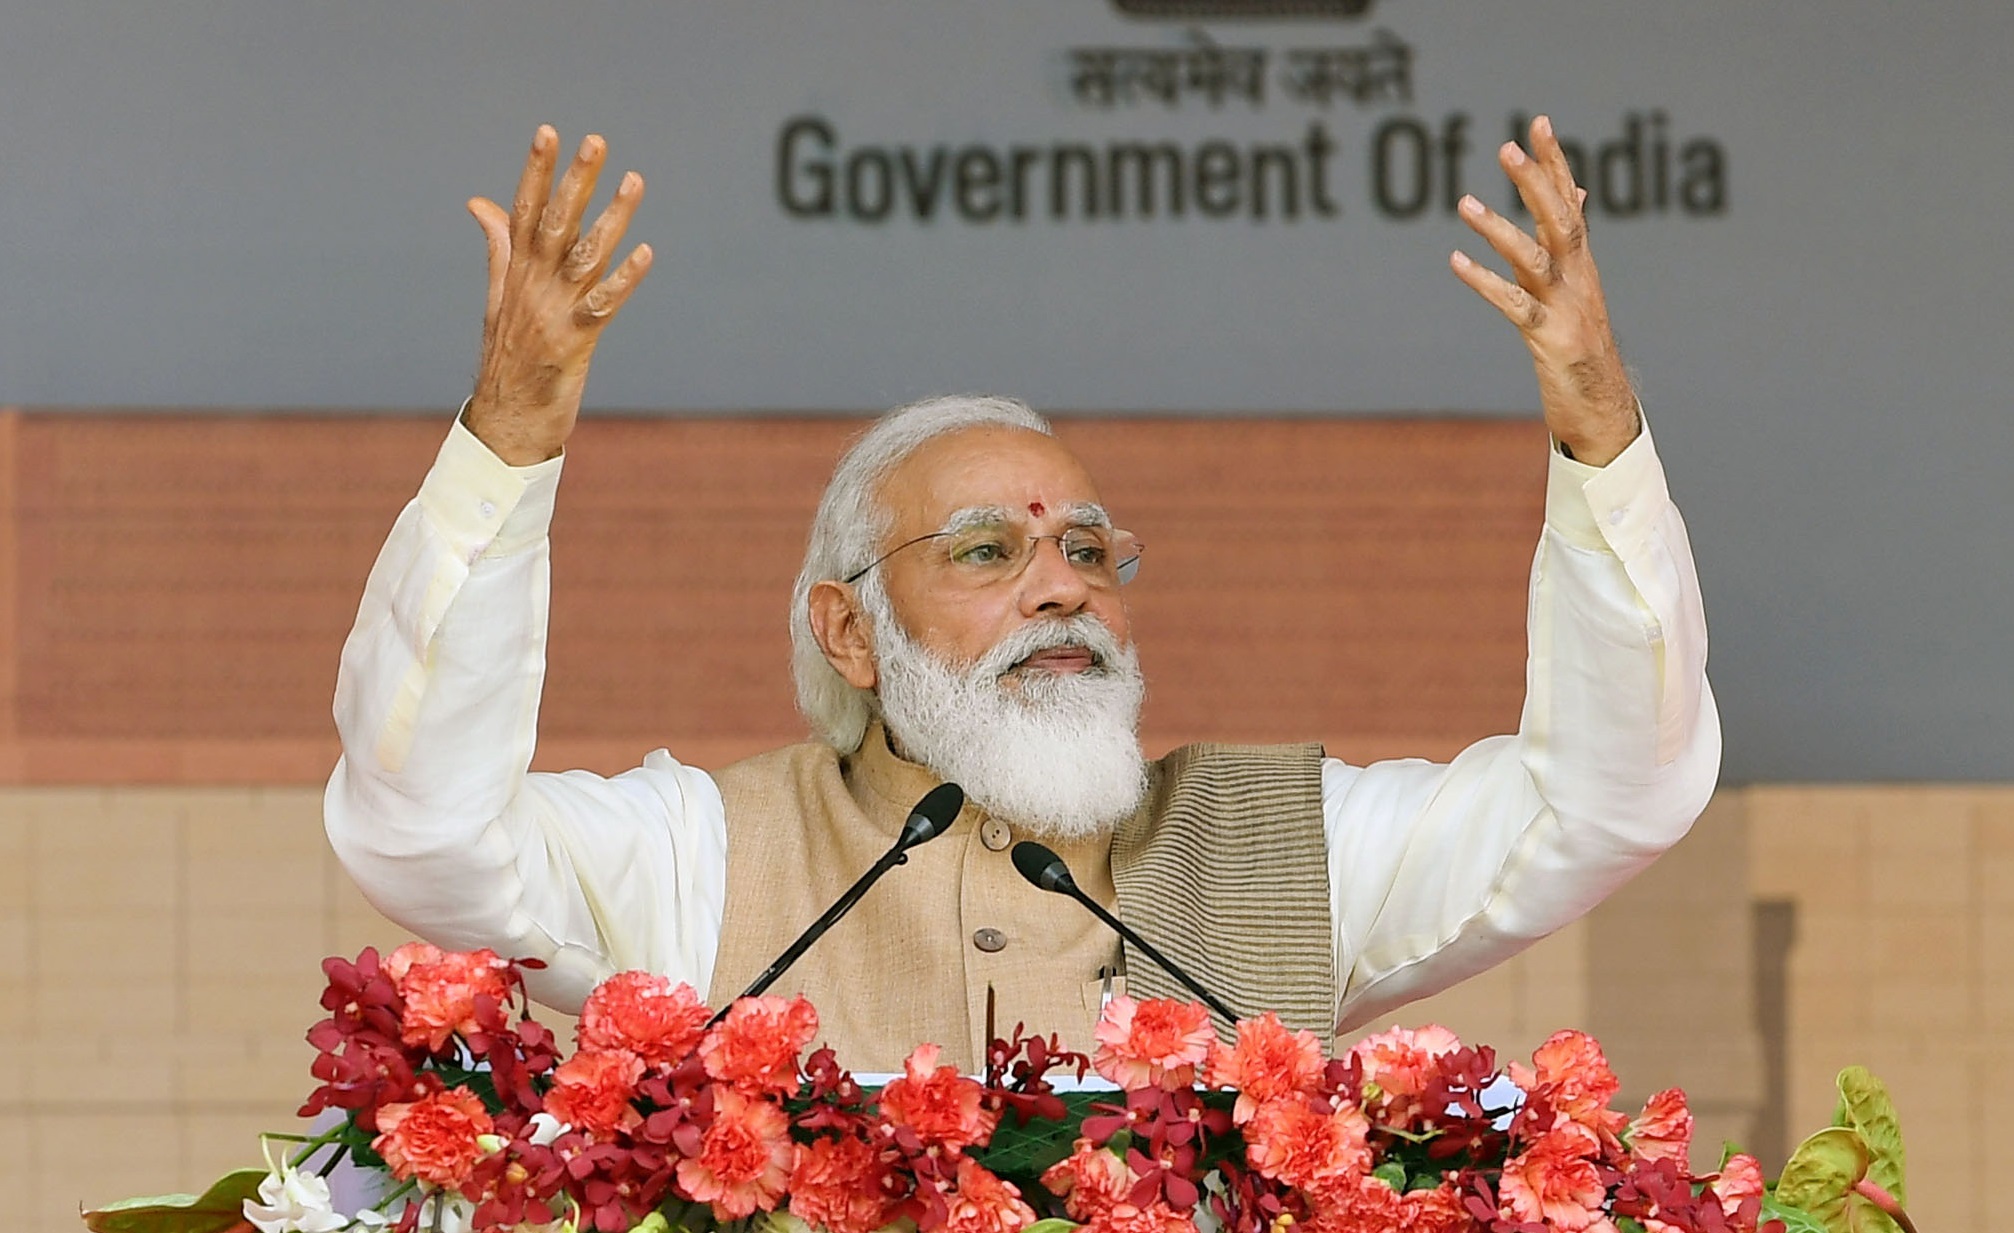 Farm laws will bring investments, technology and create new markets: Modi